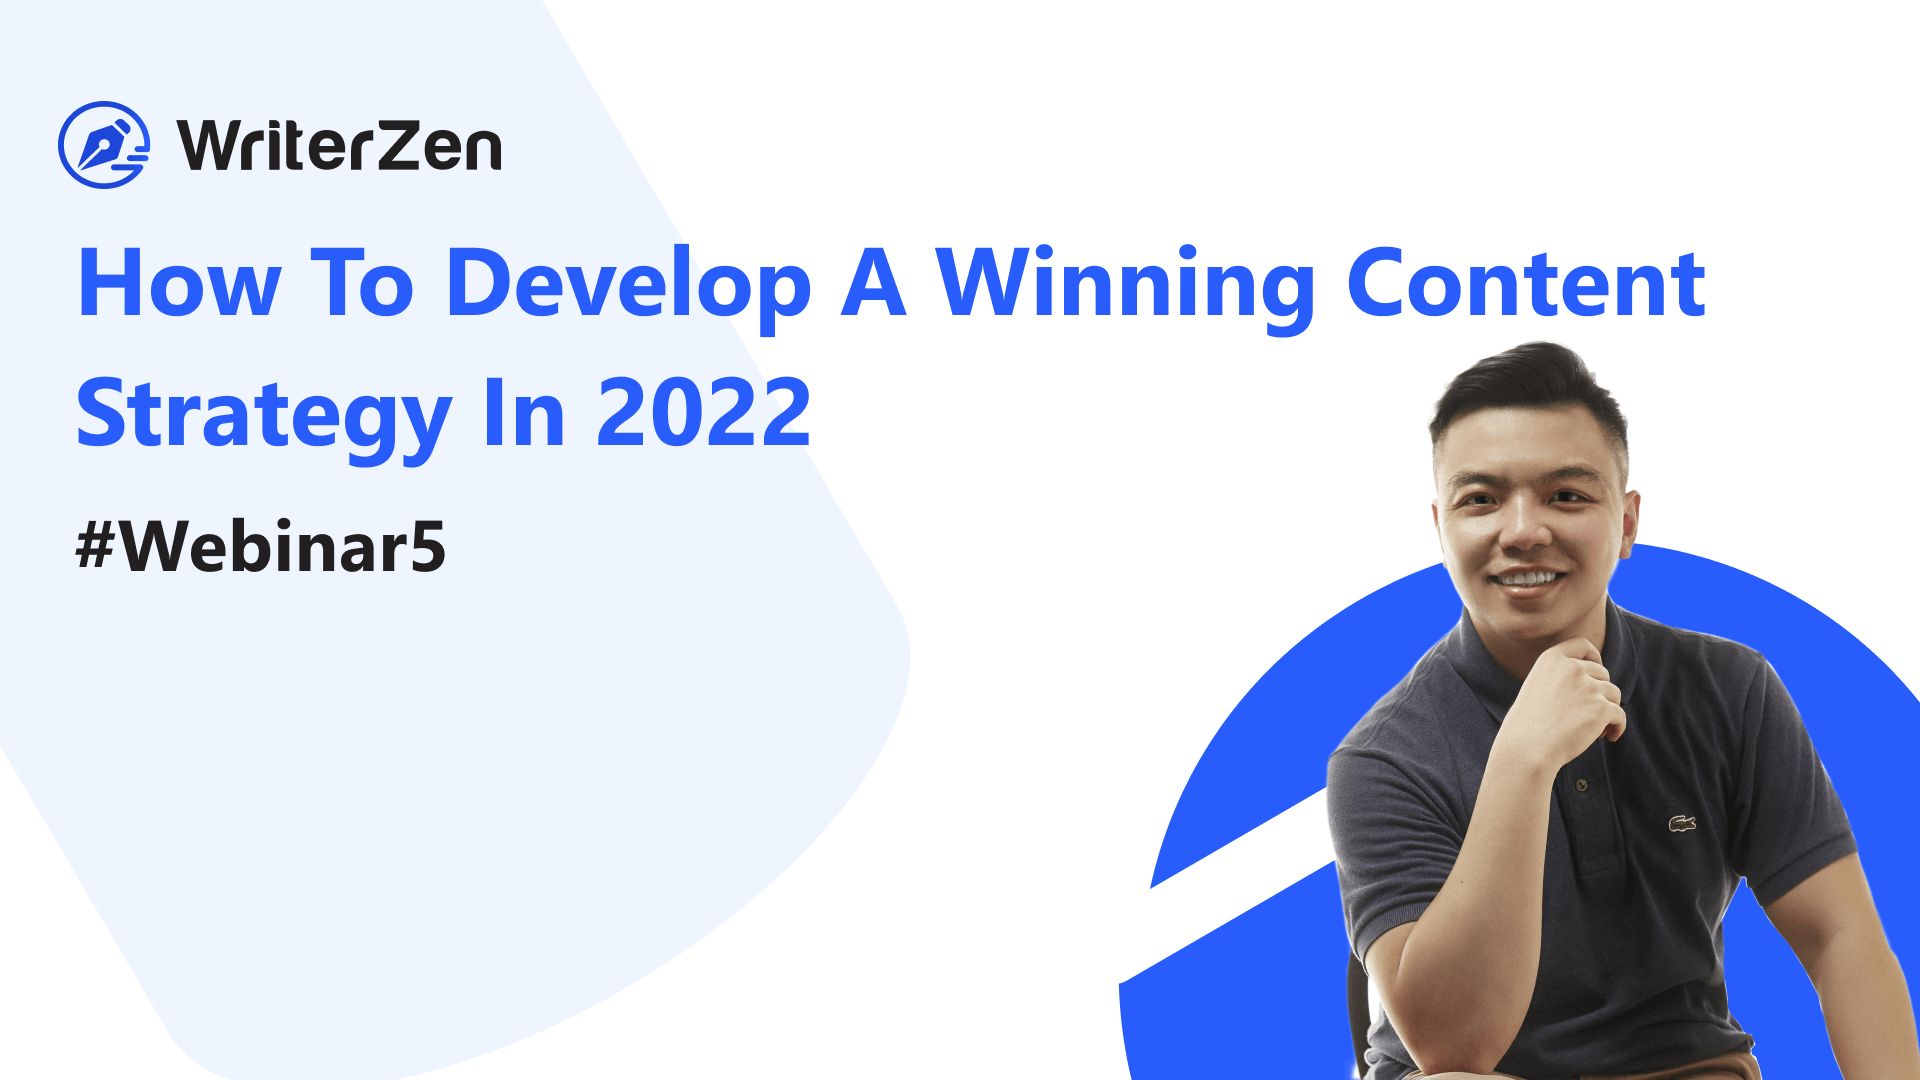 How To Develop A Winning Content Strategy In 2022